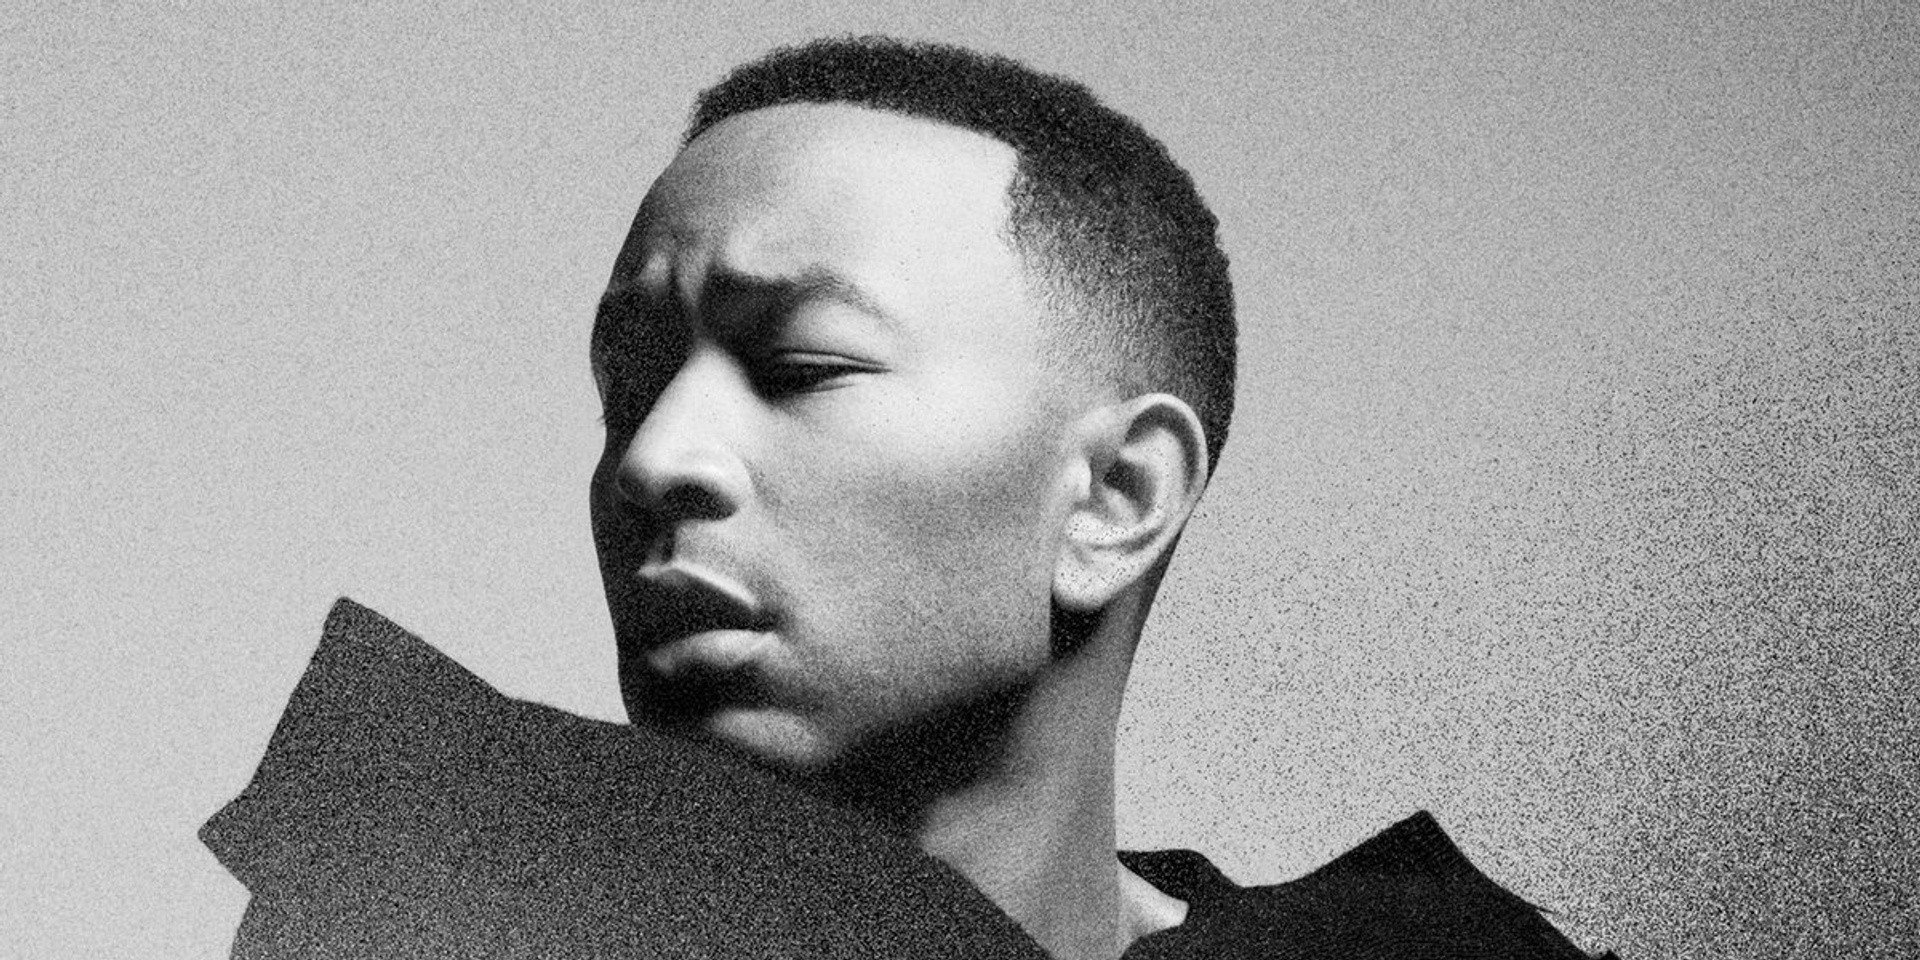 John Legend to perform in Malaysia next month